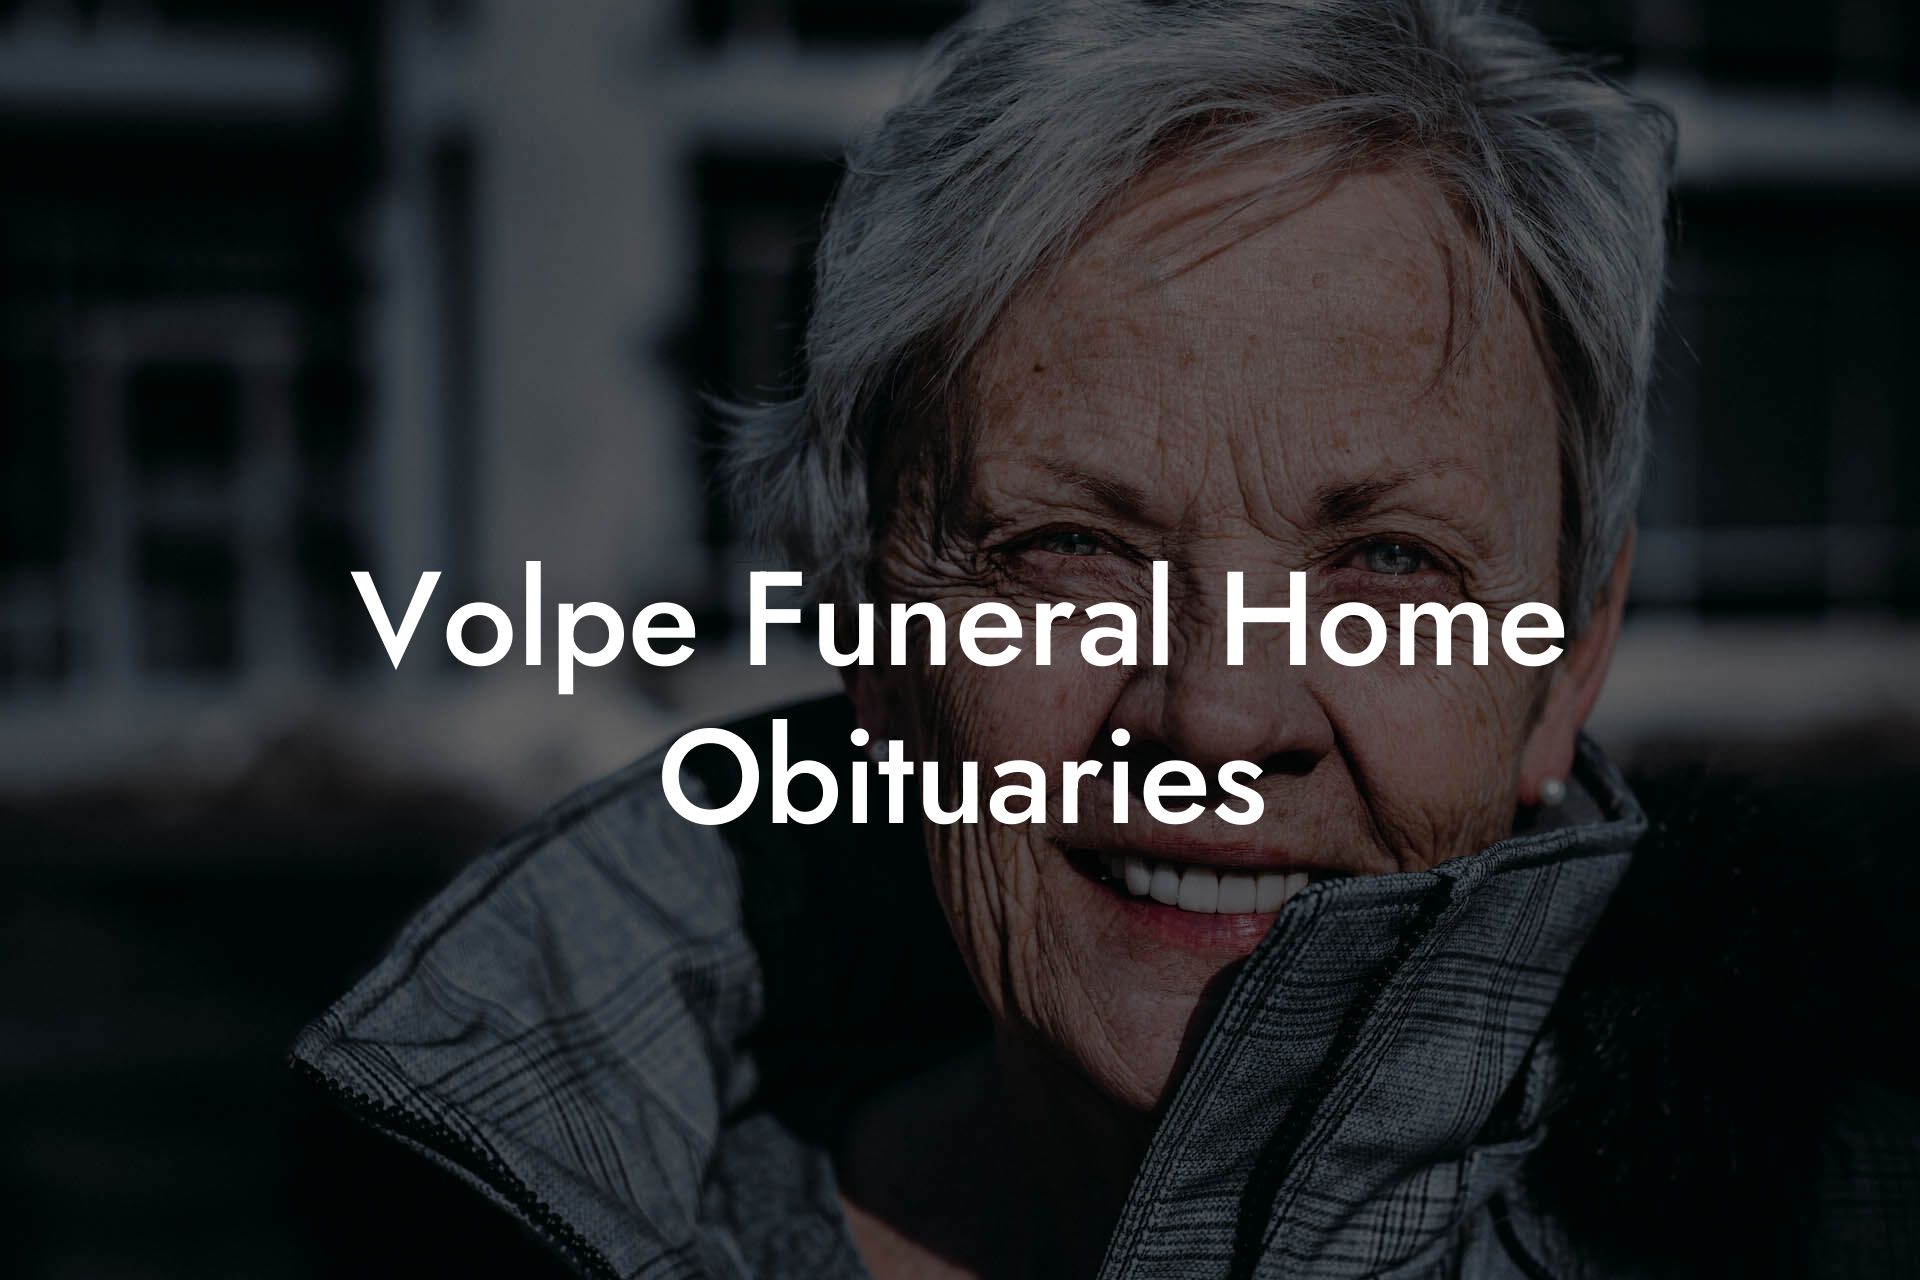 Volpe Funeral Home Obituaries